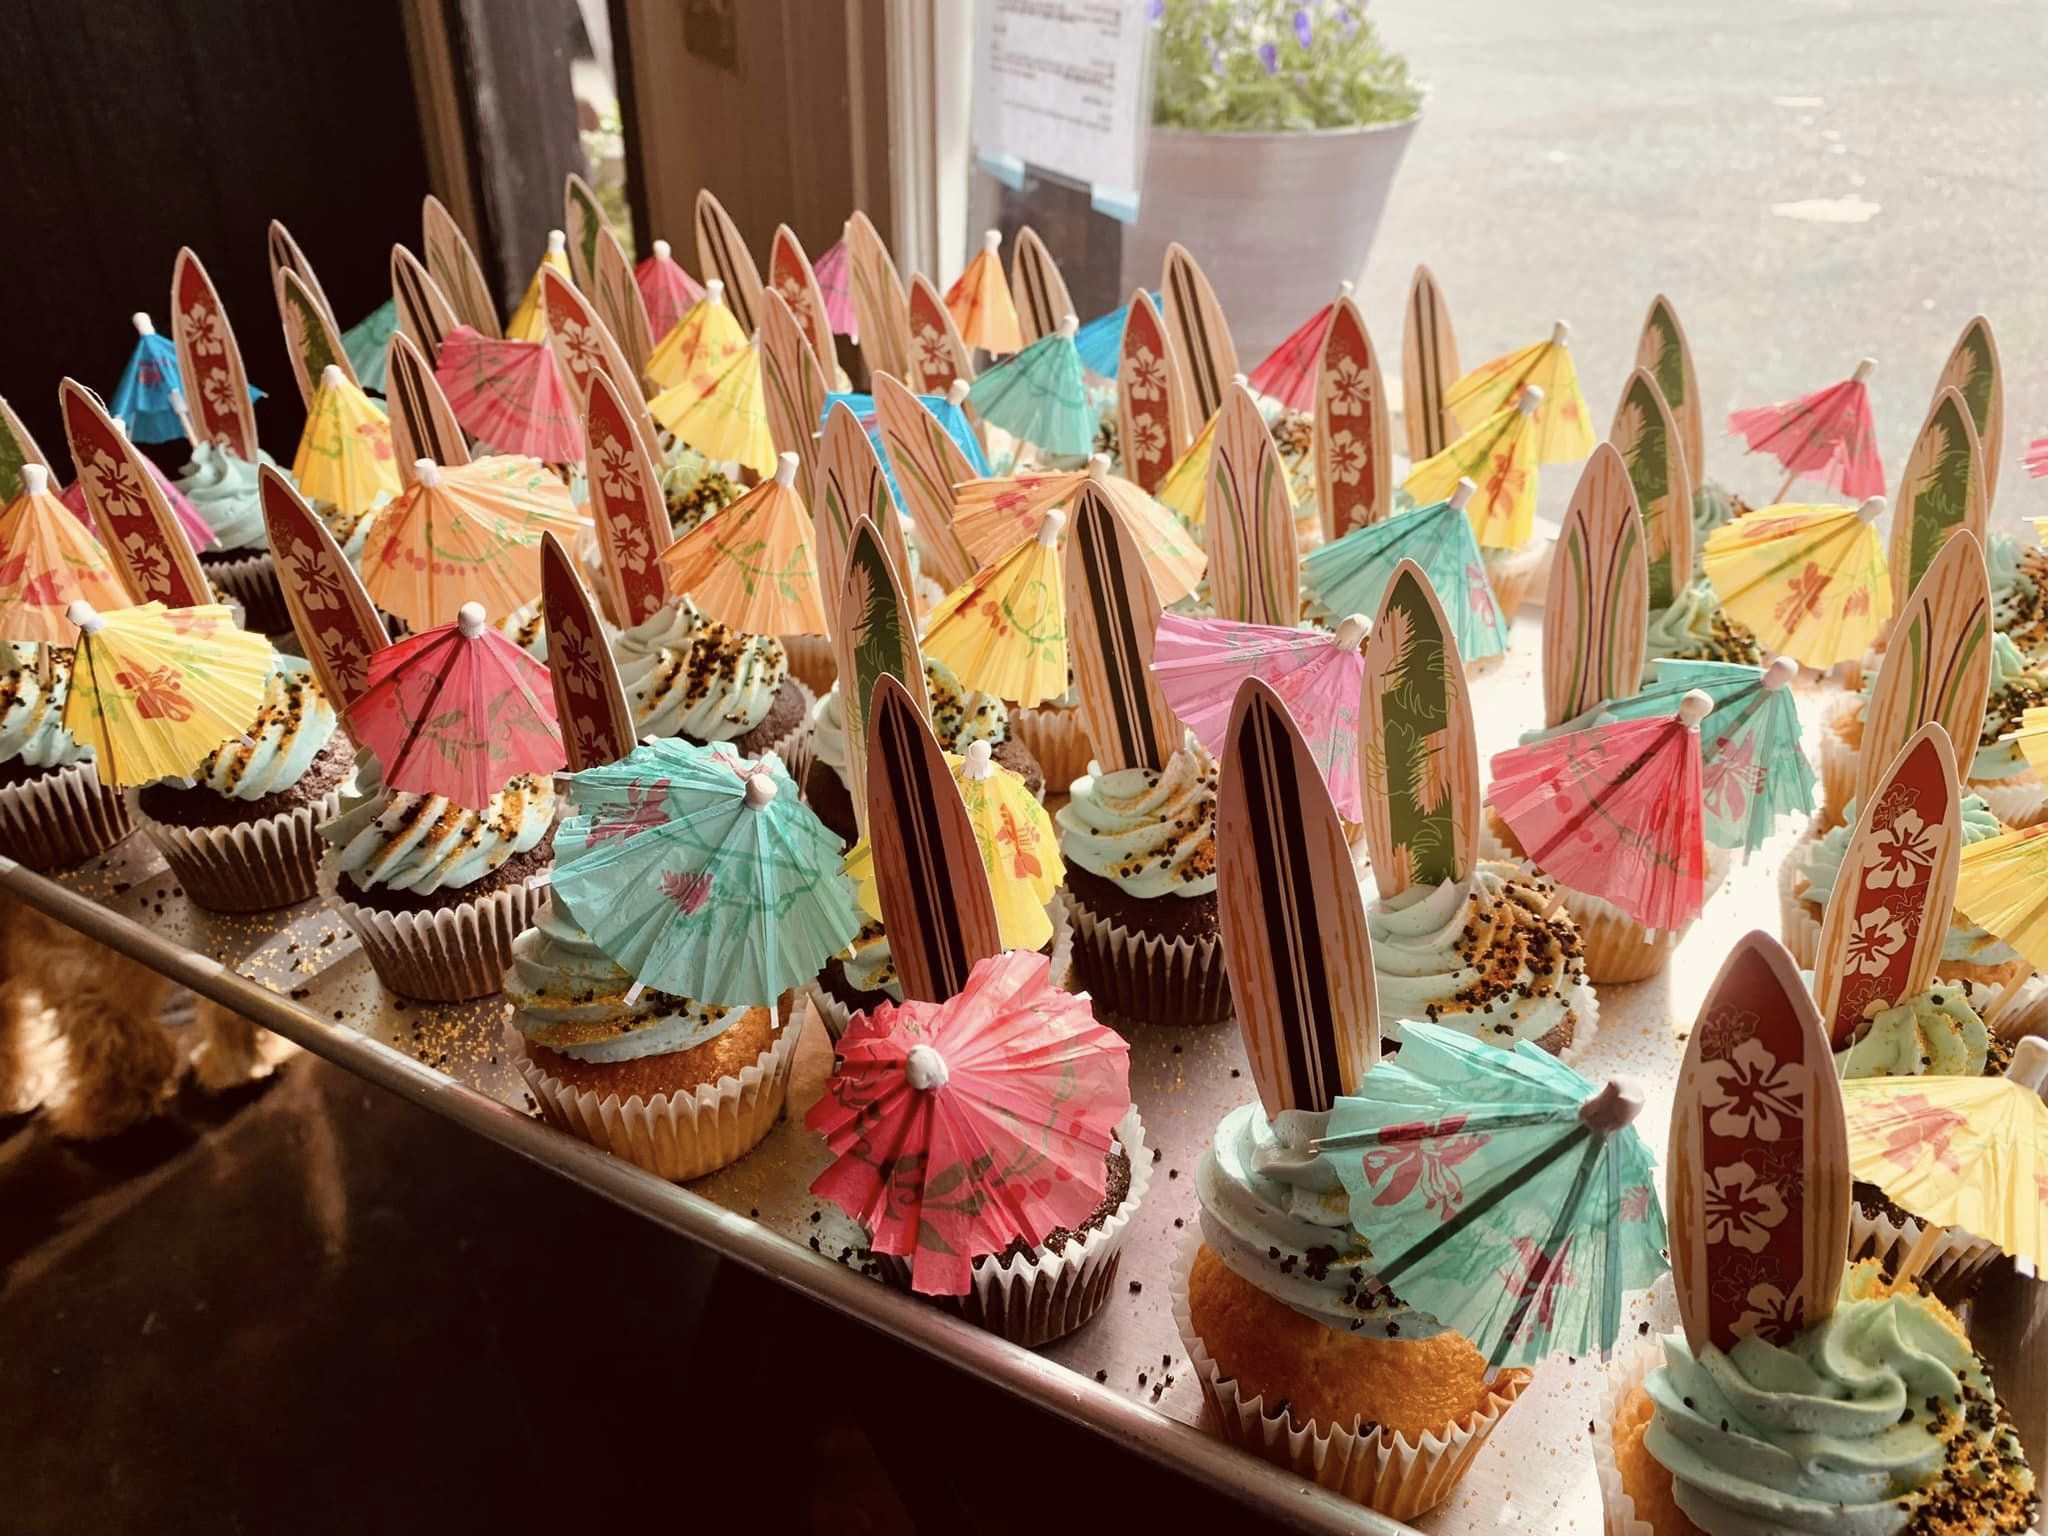 Cupcakes at Divine South Kitchen and Catering in Gold Beach, Oregon